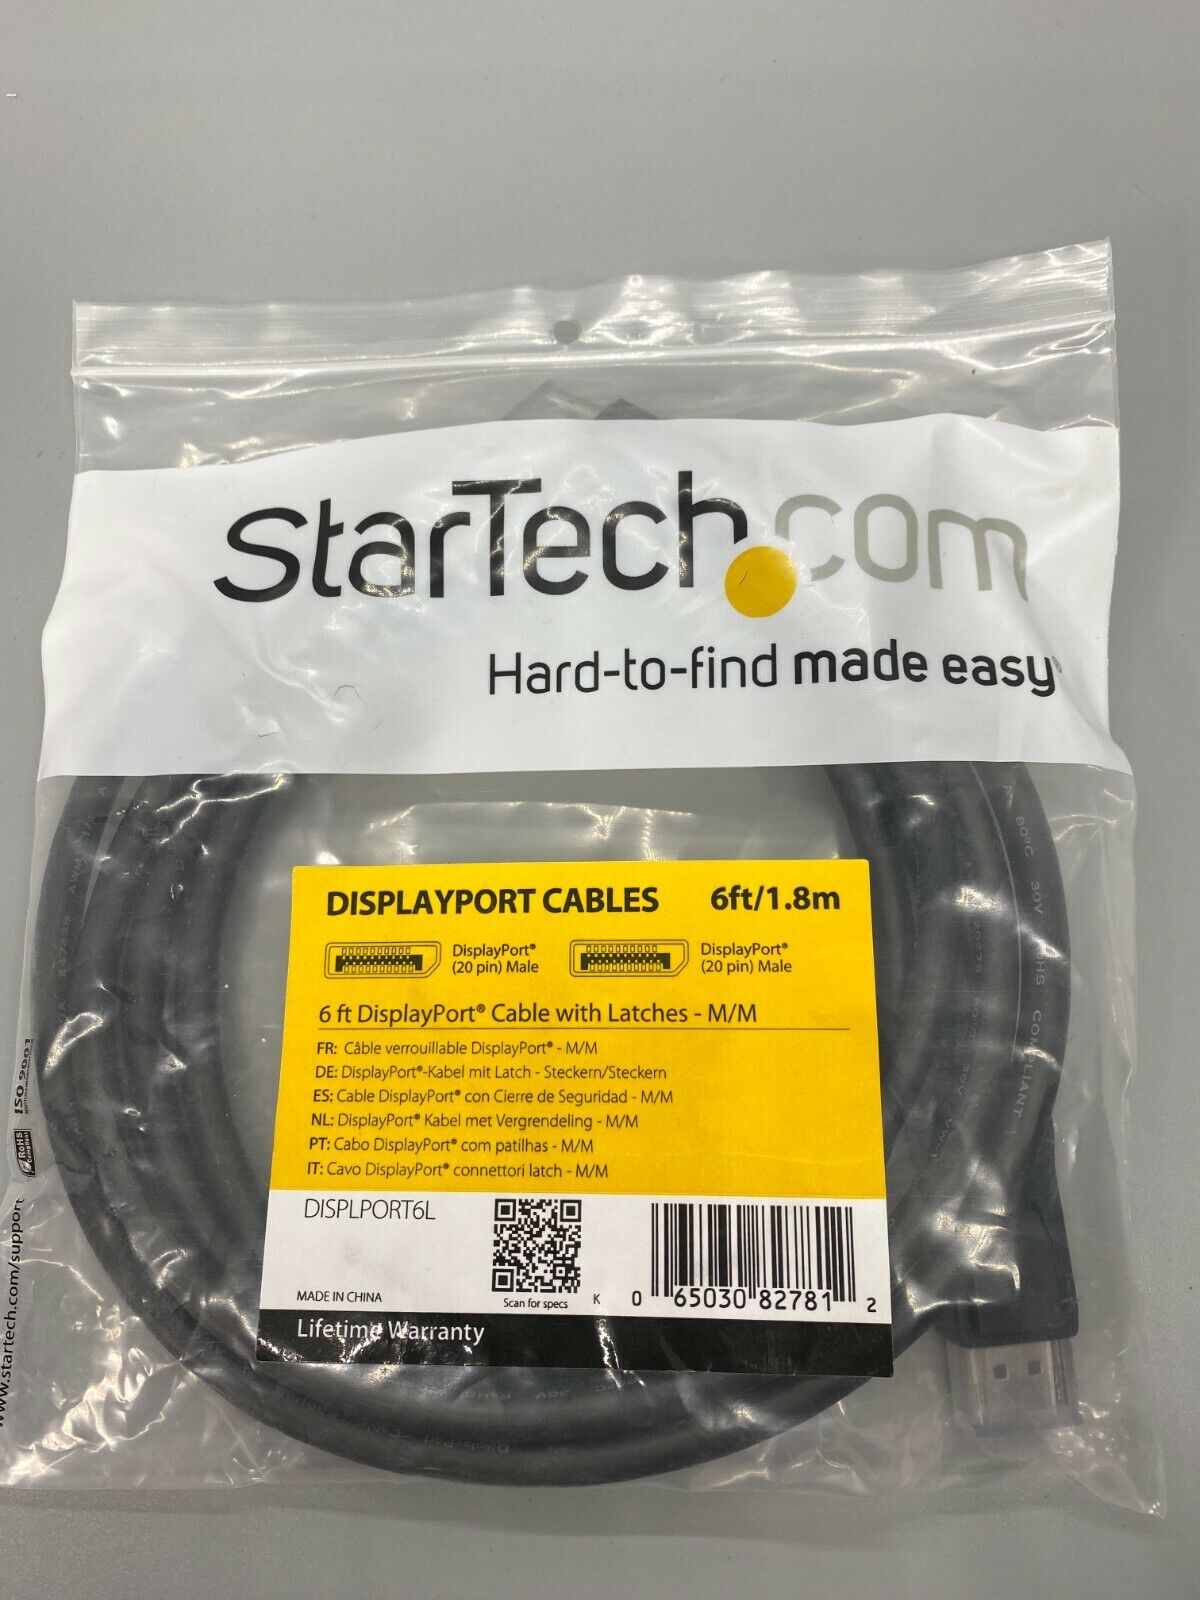 Brand NEW STARTECH 6ft/1.8 DisplayPort Cable WITH LATCHES 